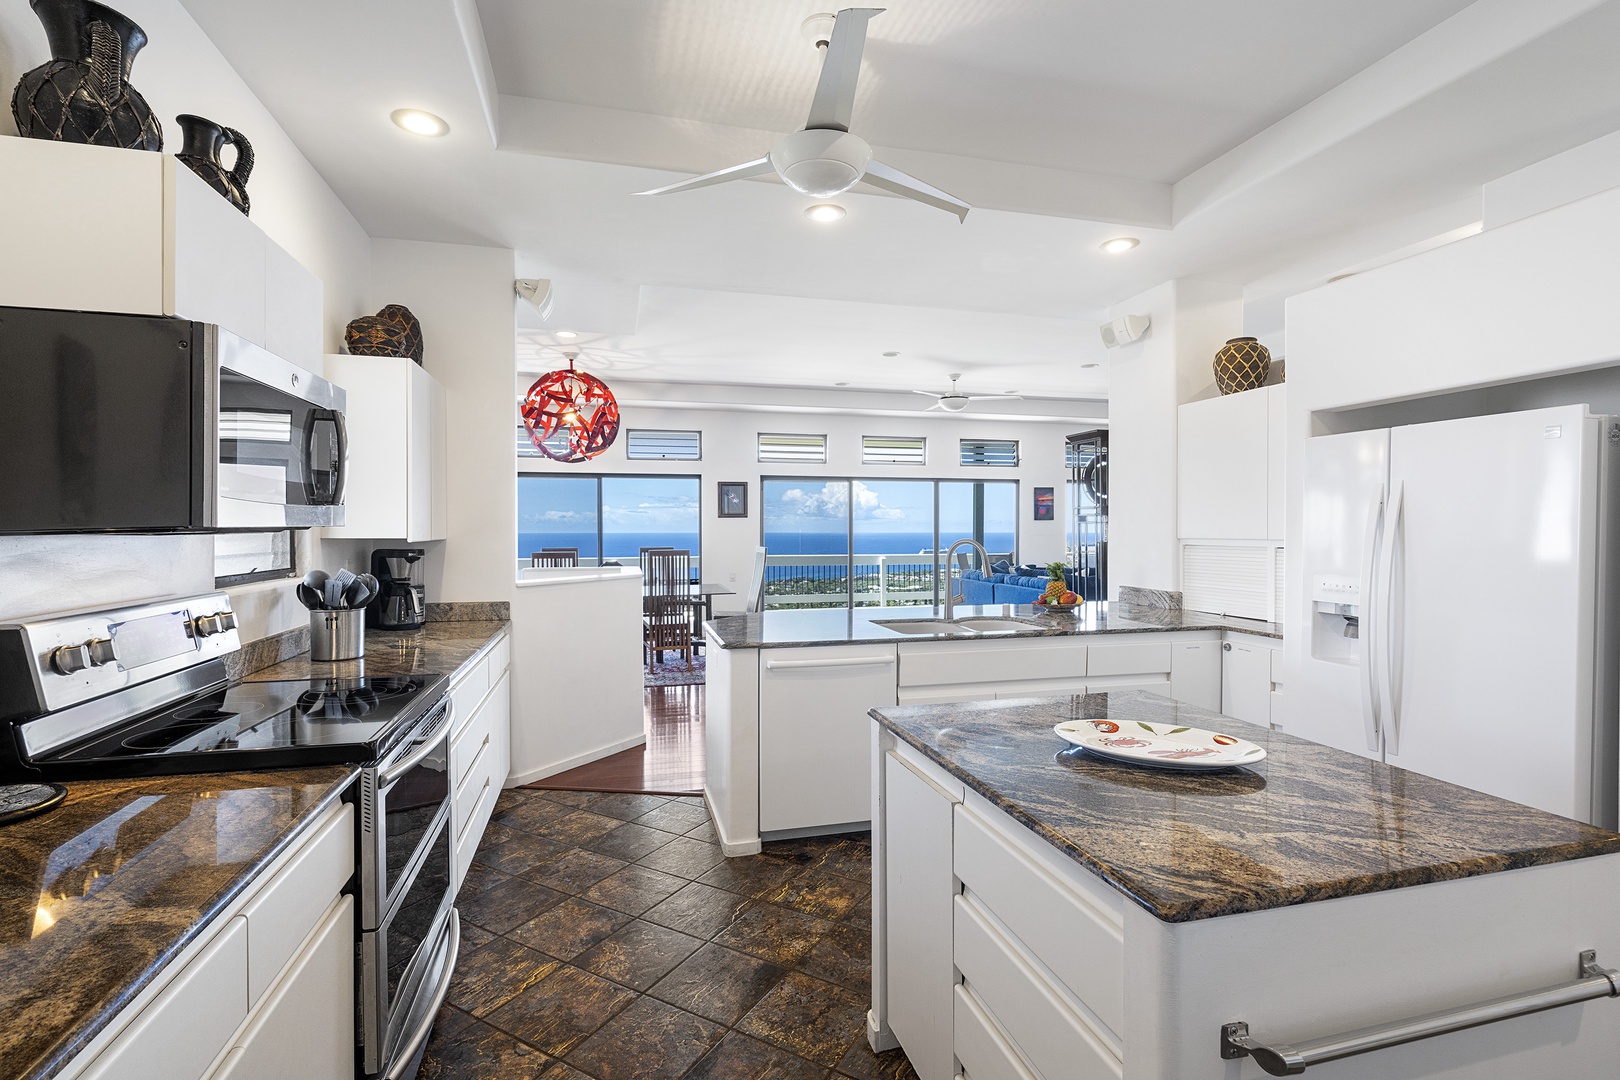 Kailua Kona Vacation Rentals, Ho'o Maluhia - Wash dishes with a view of the Pacific!